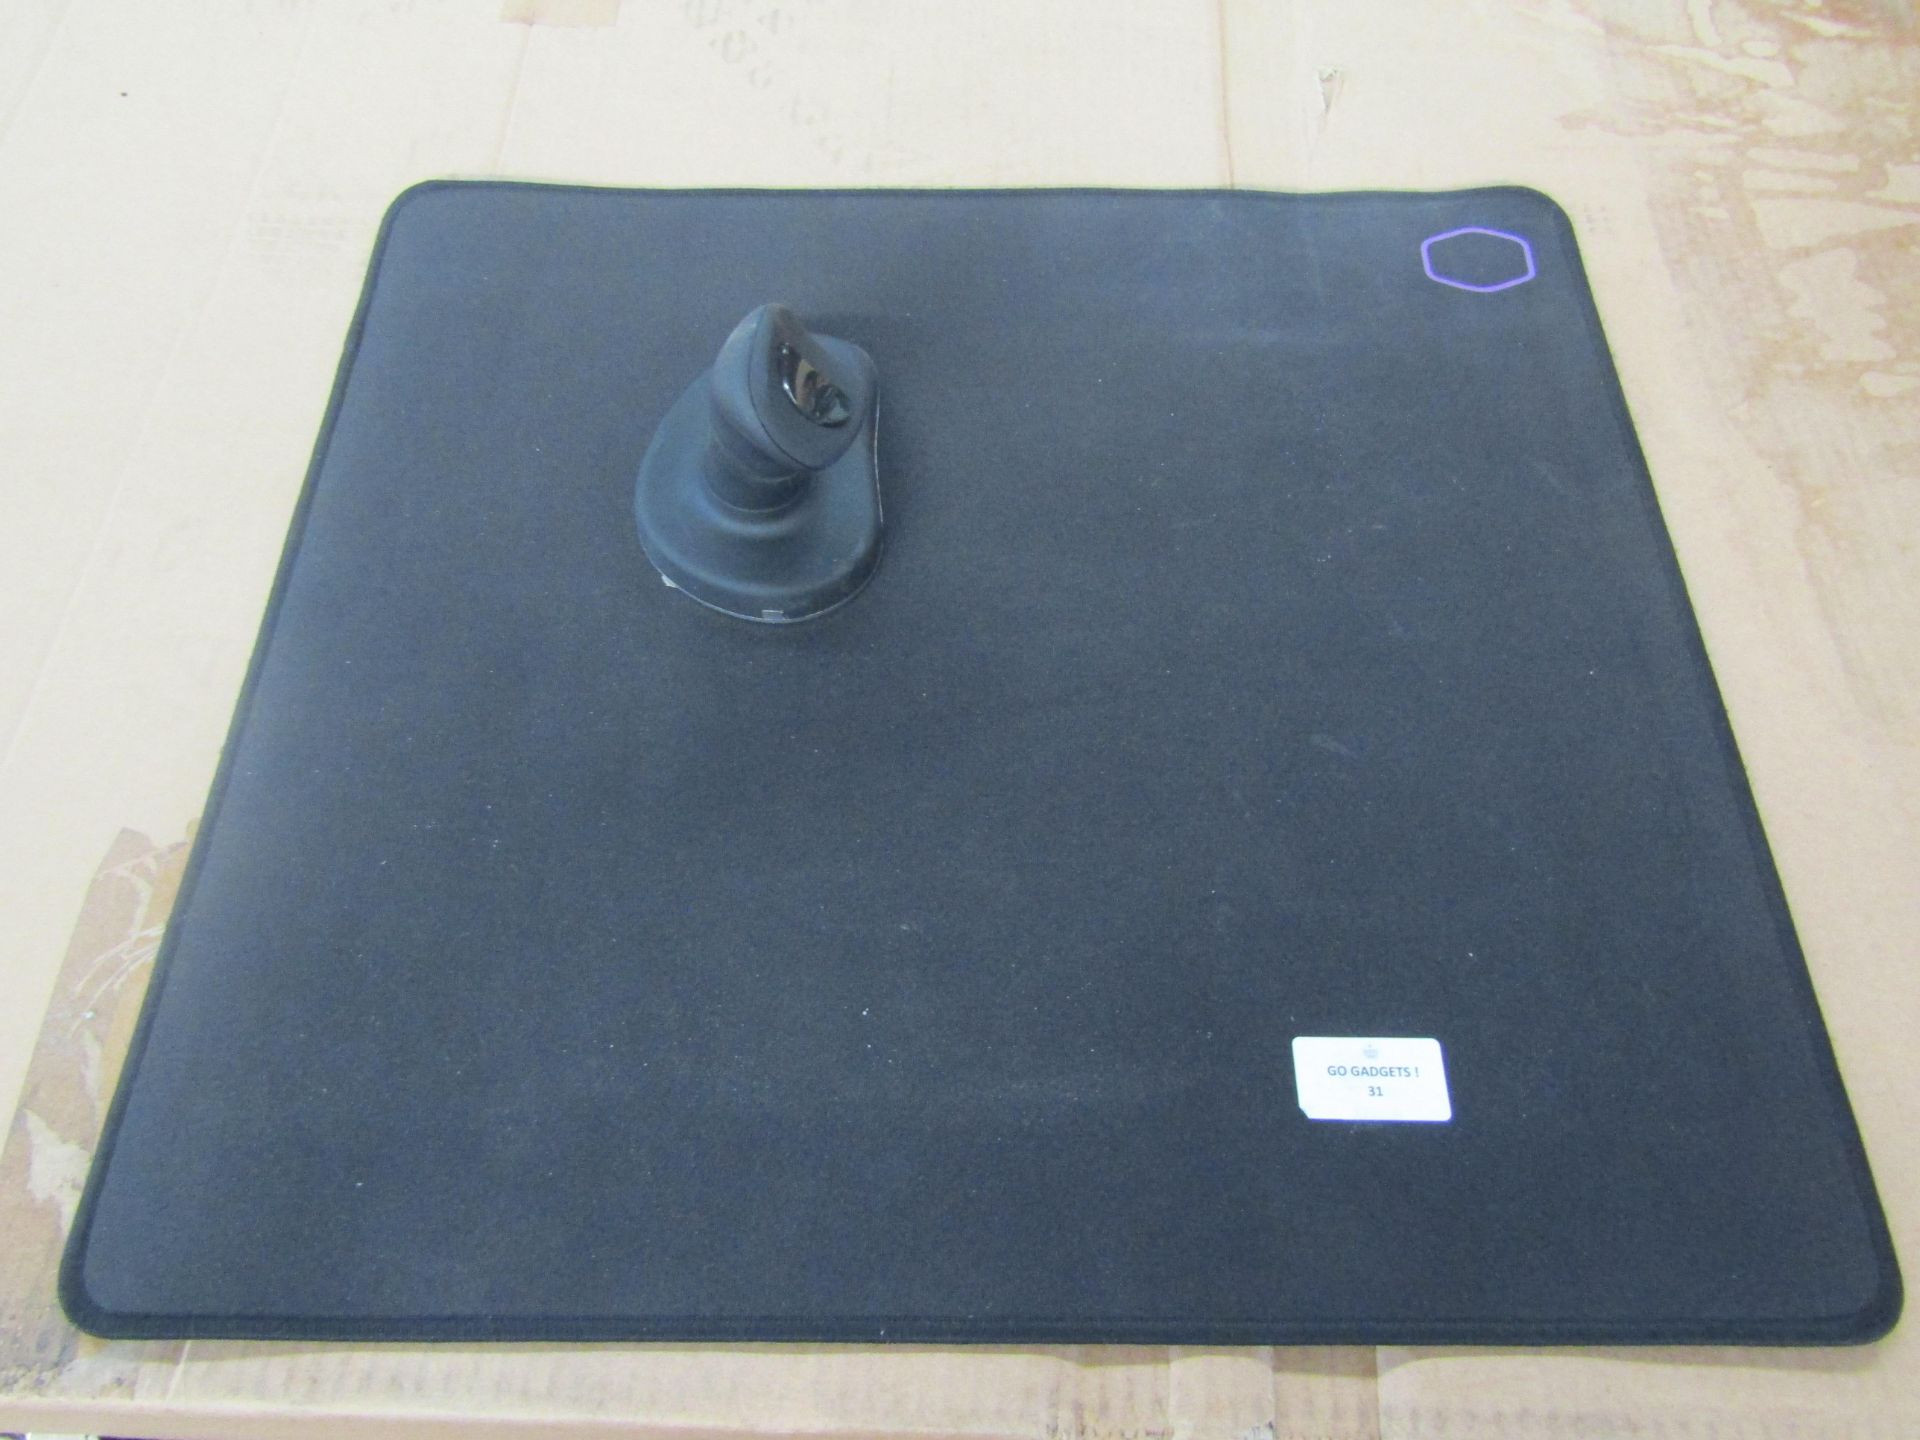 2x Items Being - 1x EM550 3M Wireless Ergonomic Mouse, Small - 1x Large Black Mouse Pad, Approx